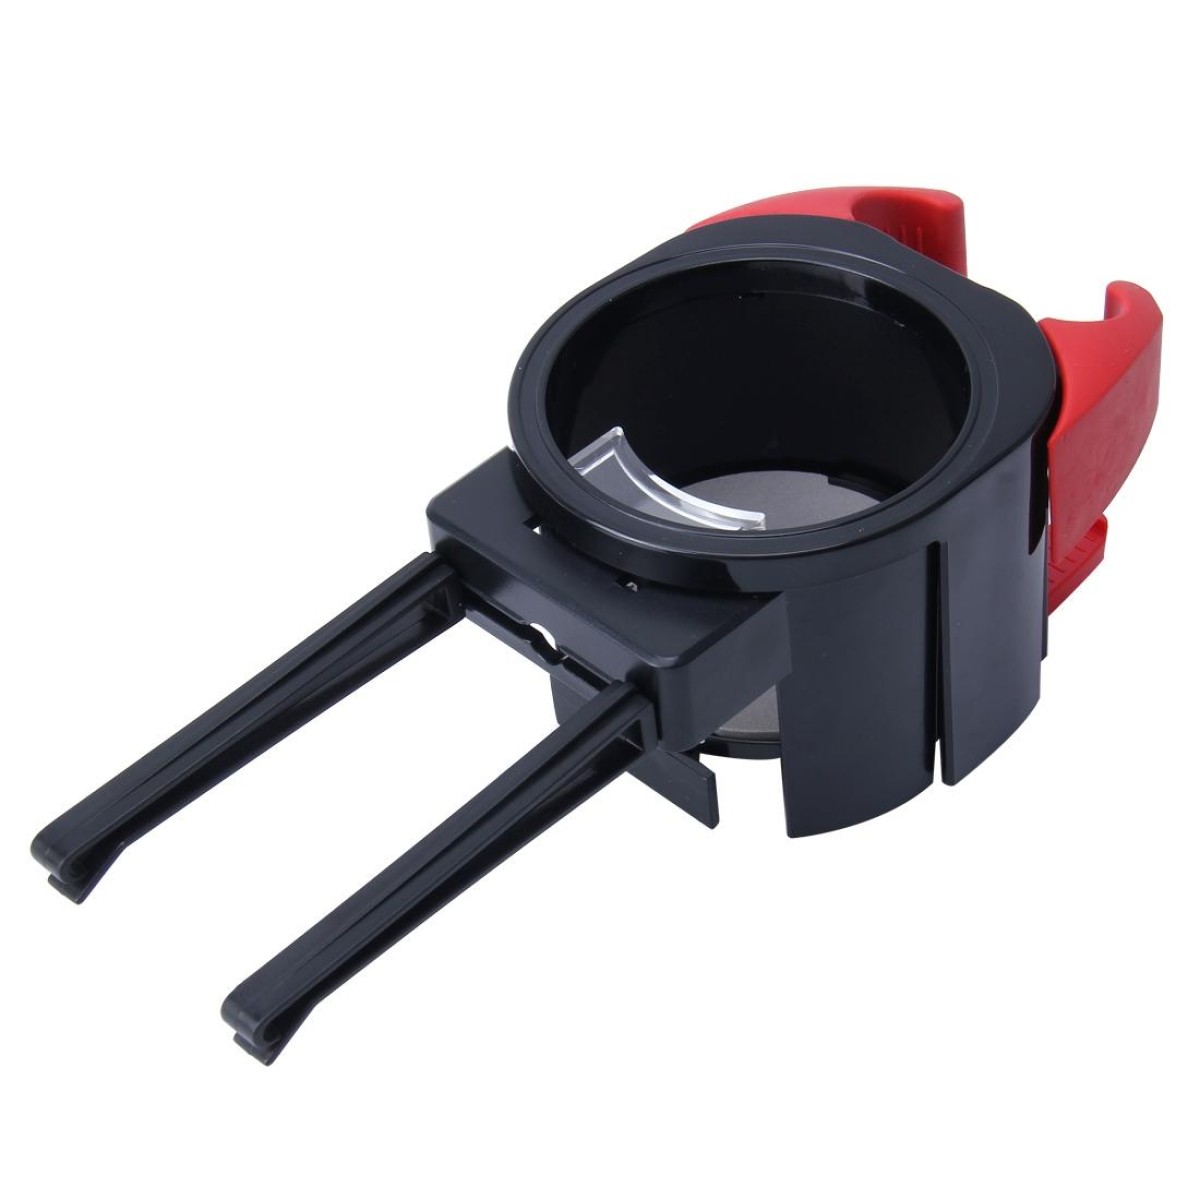 SHUNWEI SD-1027 Car Auto Multi-functional ABS Air Vent Drink Holder Bottle Cup Holder Phone Holder Mobile Mount (Red)